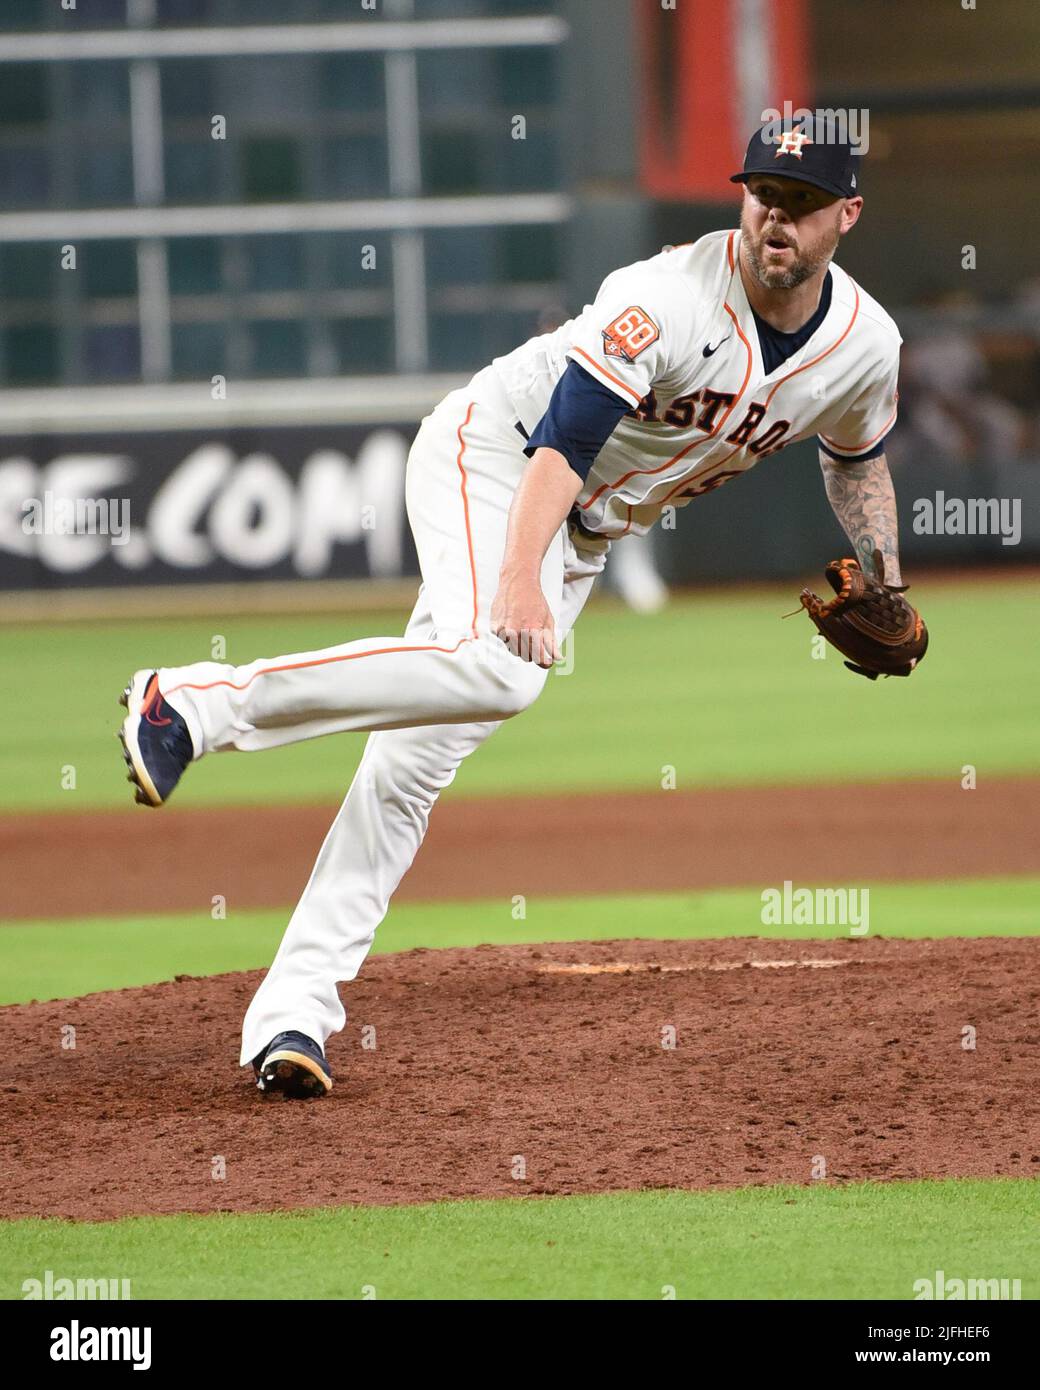 Reports - Houston Astros, Ryan Pressly agree to 2-year, $30